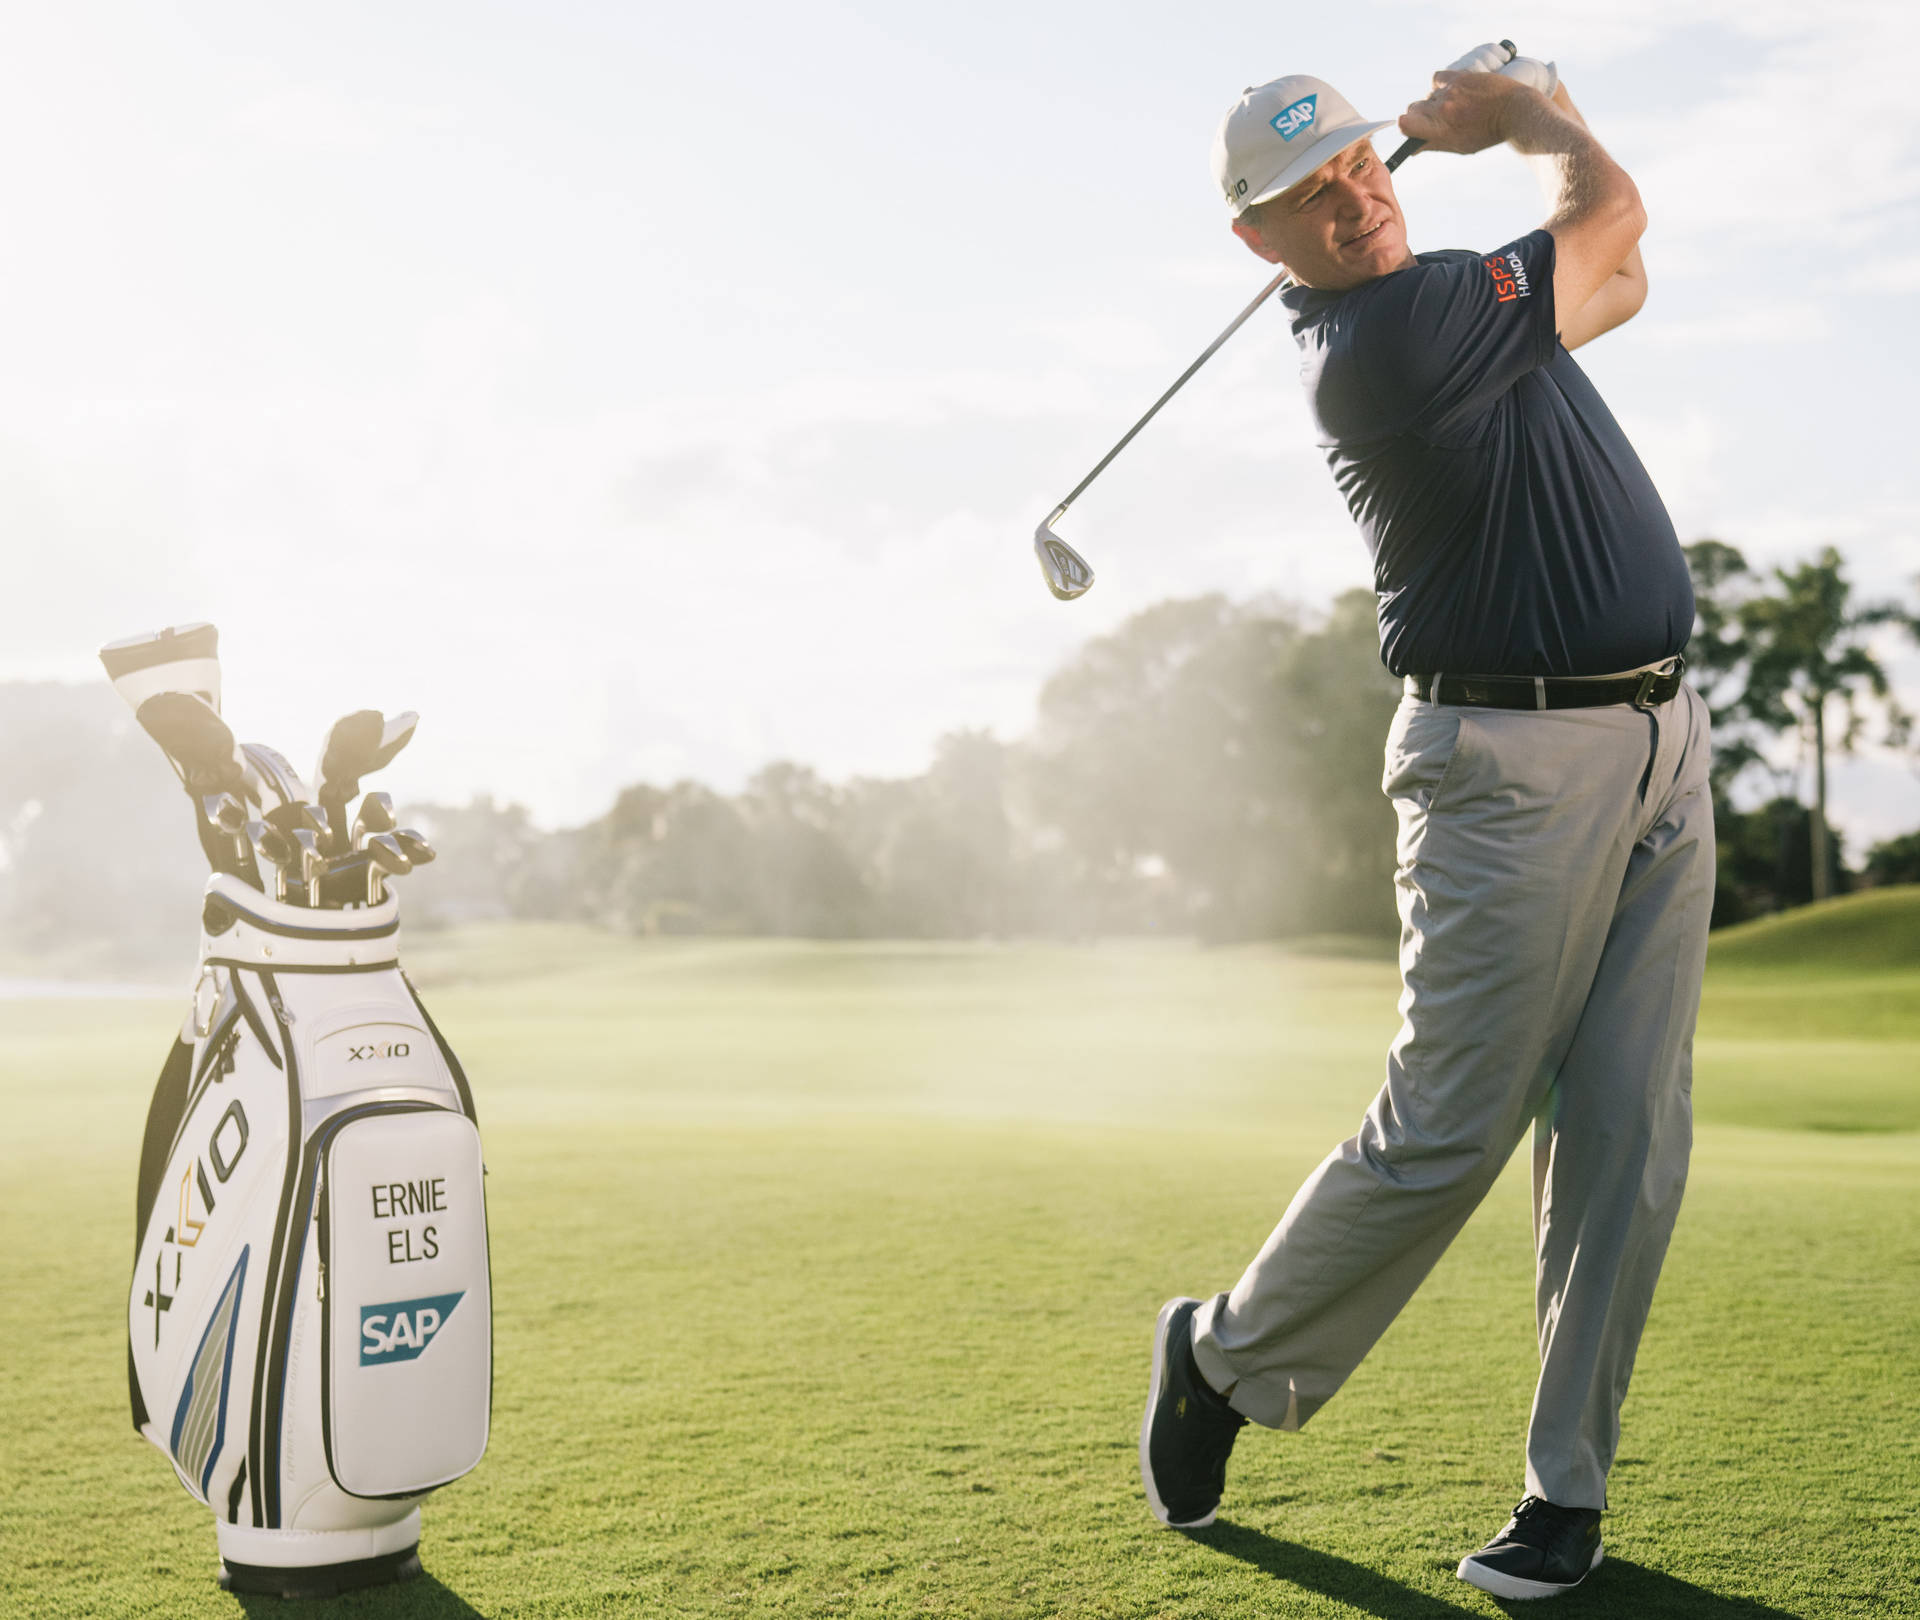 "Ernie Els in Full Swing - A Display of Golf Excellence" Wallpaper